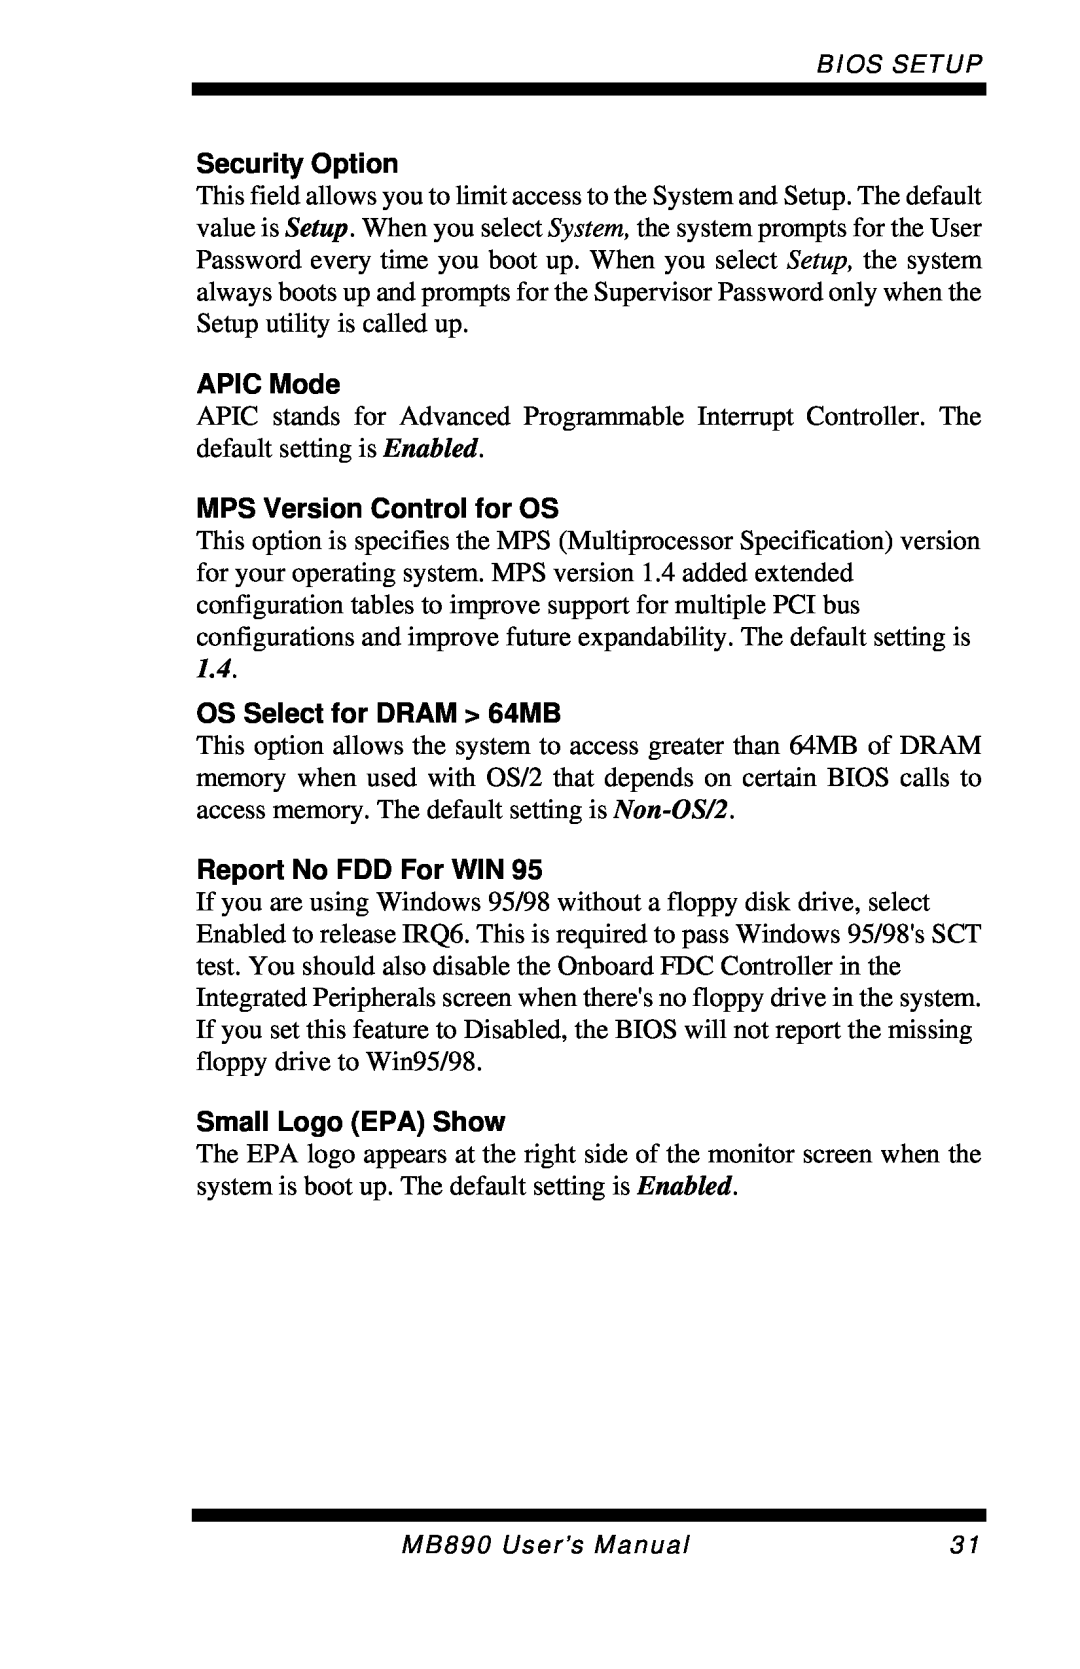 Intel MB890 Security Option, APIC Mode, MPS Version Control for OS, OS Select for DRAM 64MB, Report No FDD For WIN 